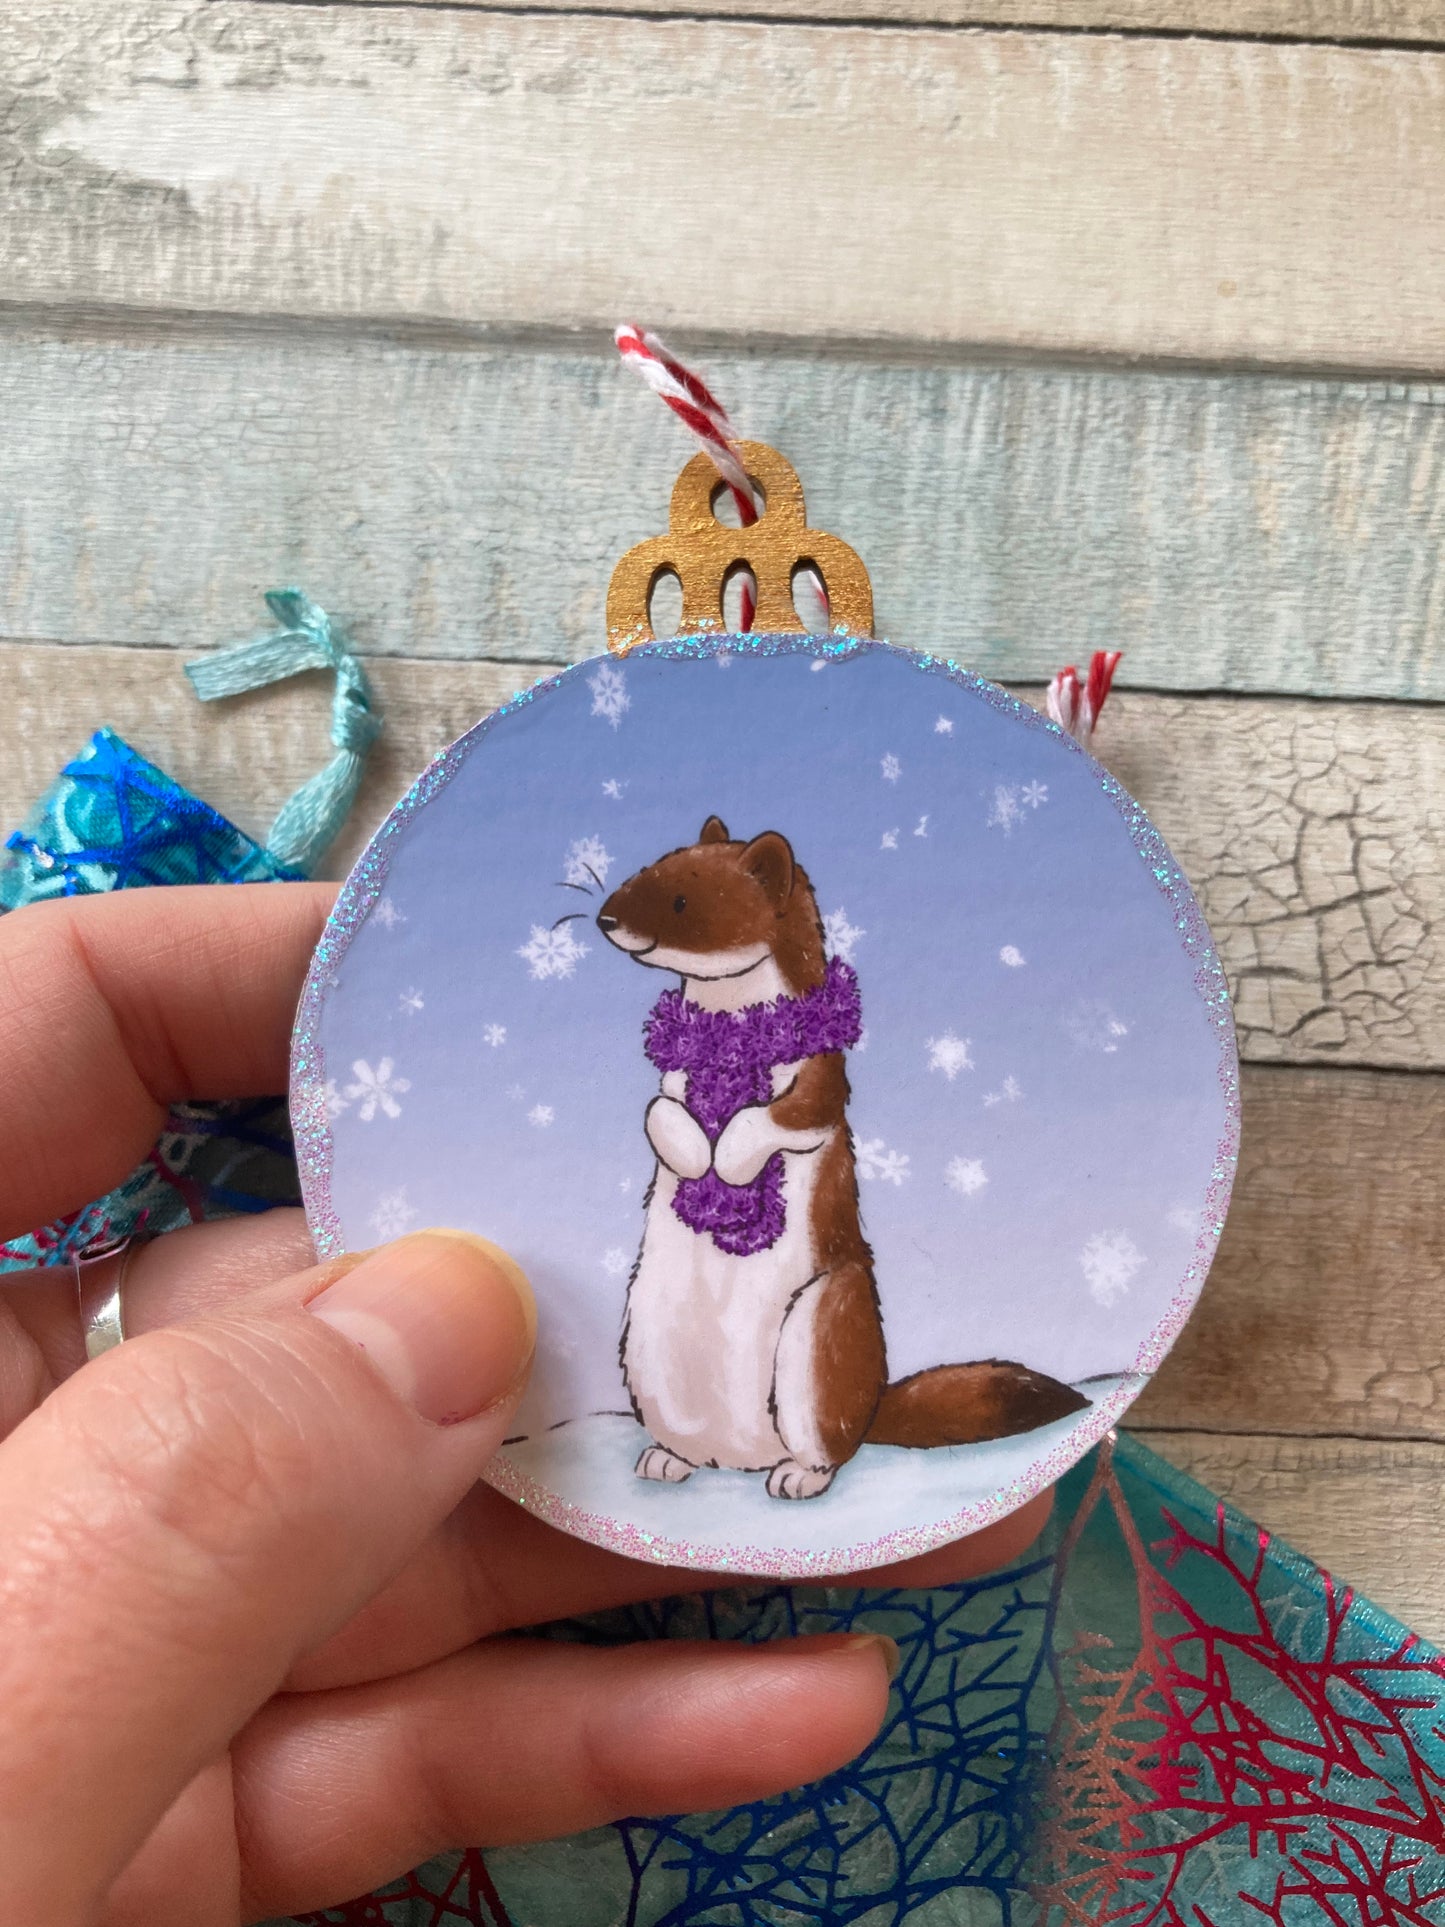 Snowy Stoat | Cute Stoat Christmas Tree Bauble